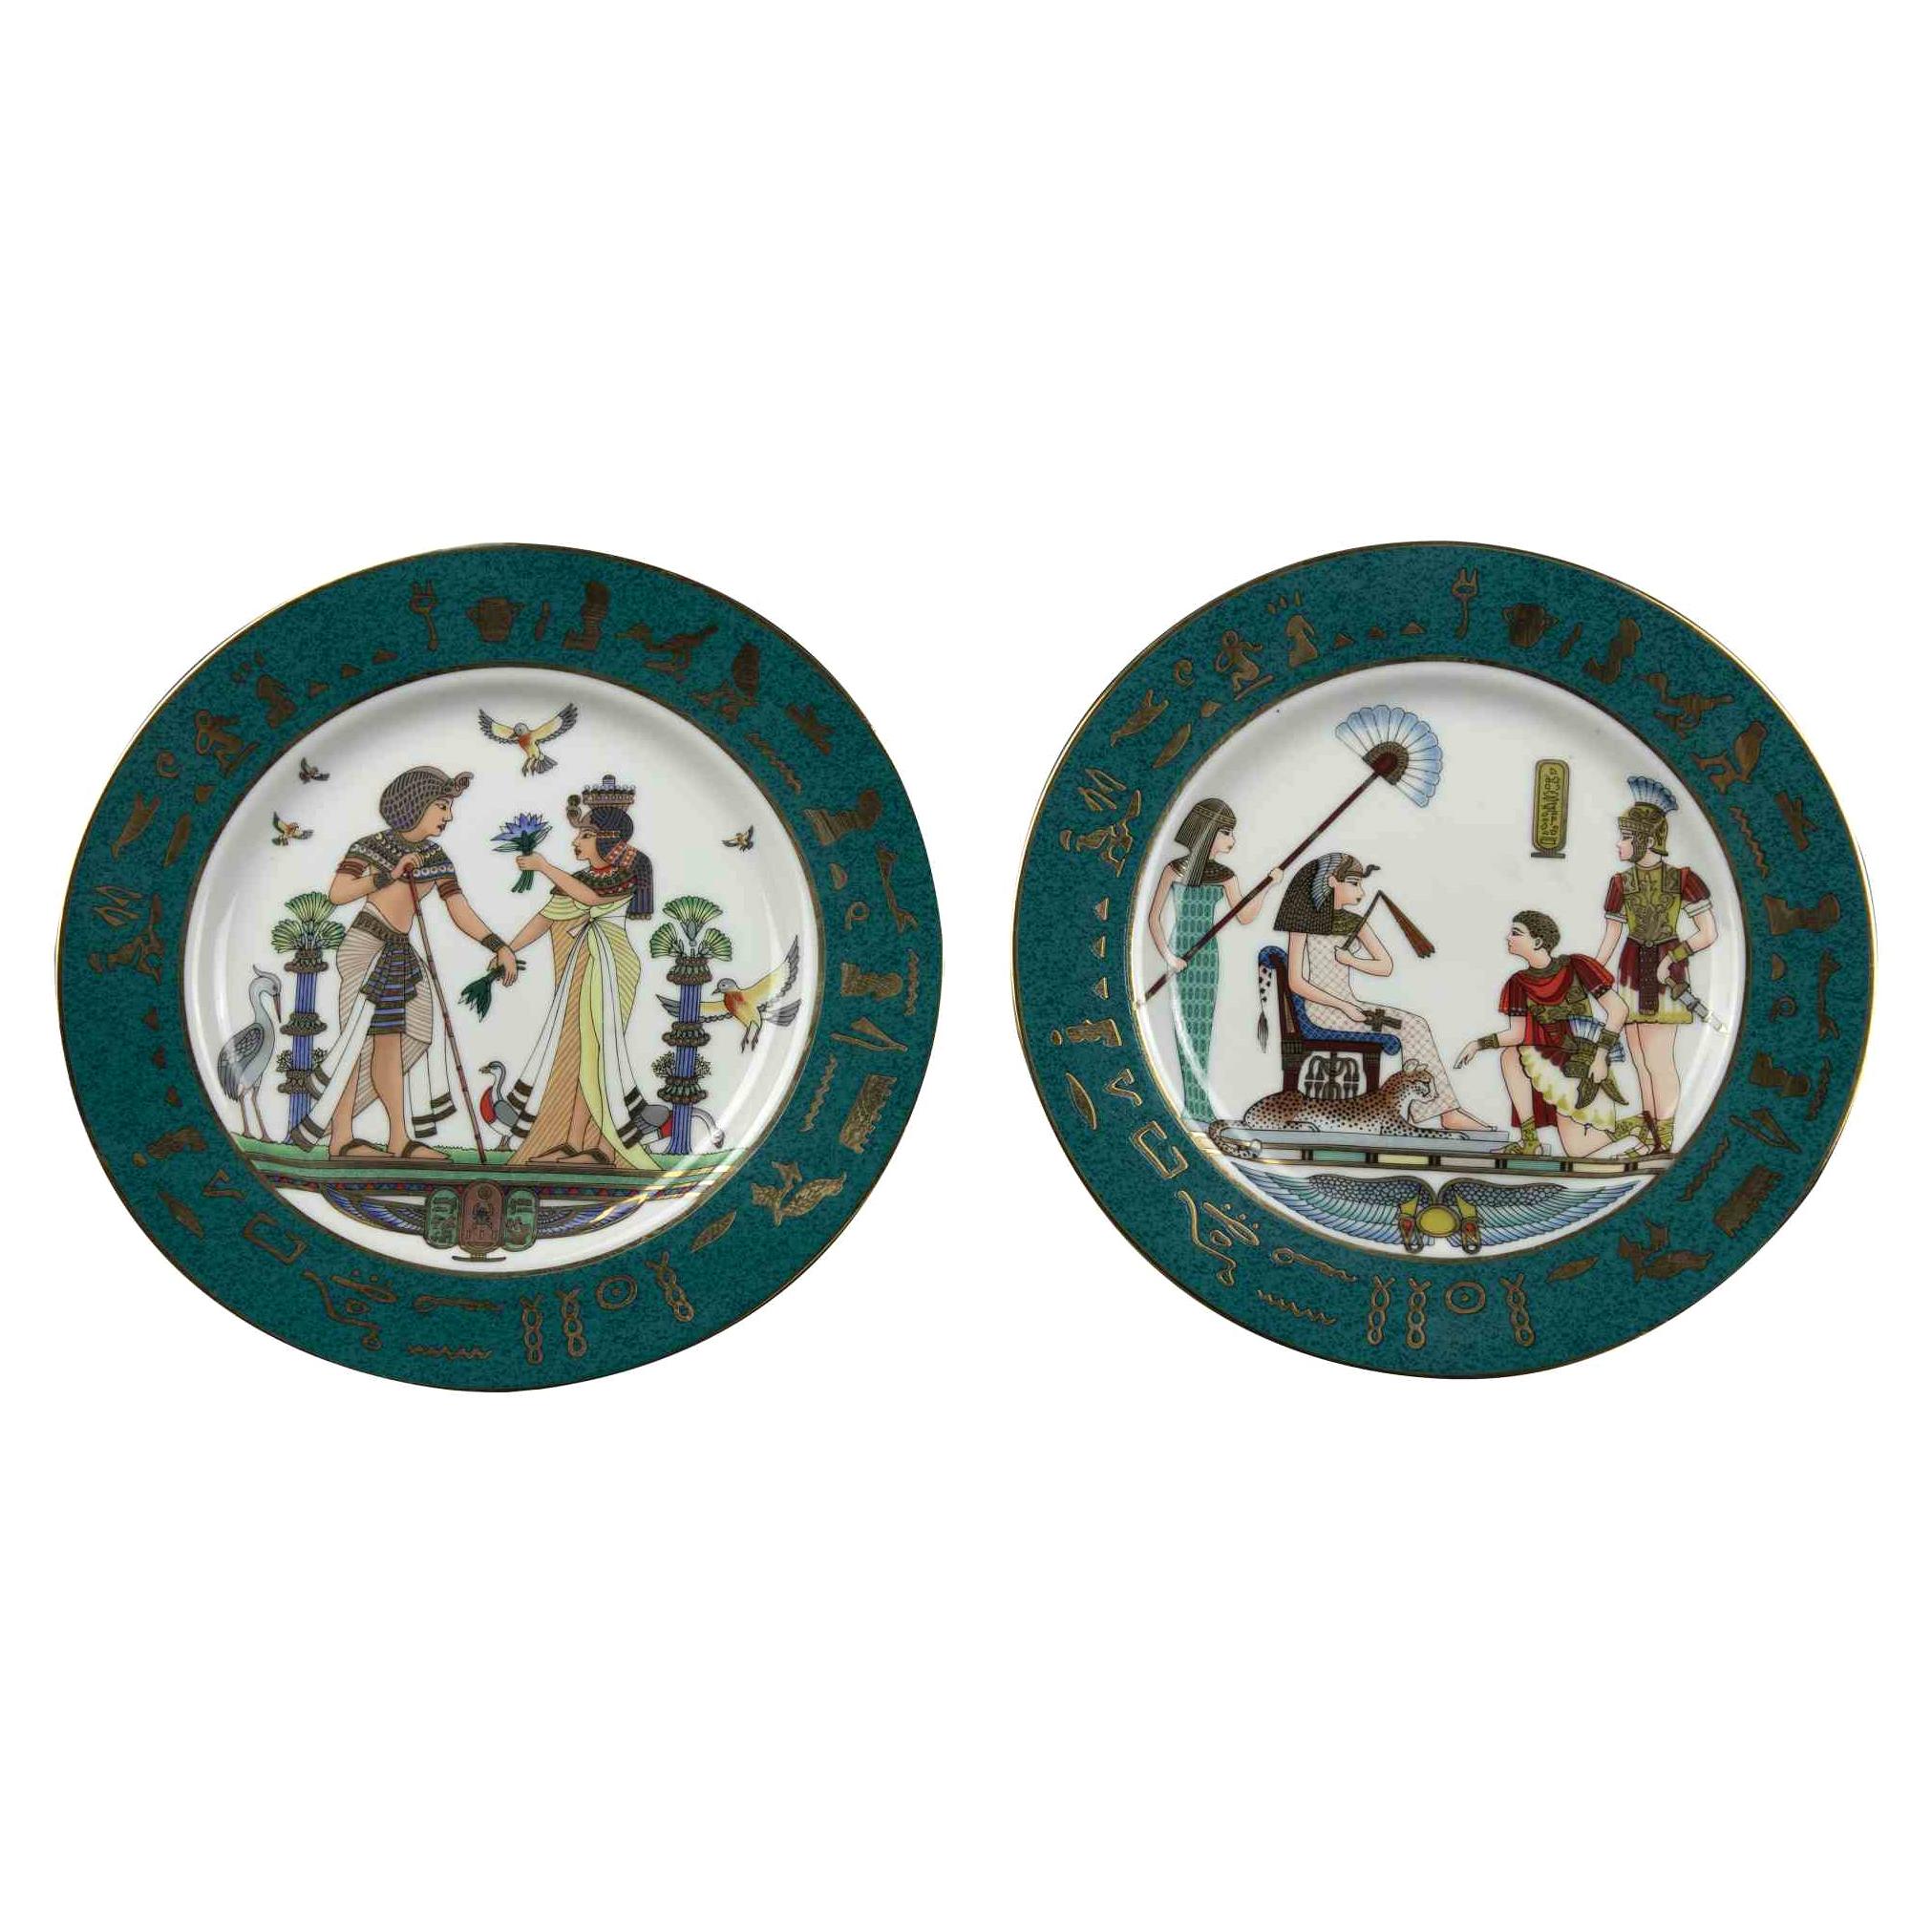 Vintage Pair of Plates with Egyptian Motives, by Fine Royal Porcelain Sculpture